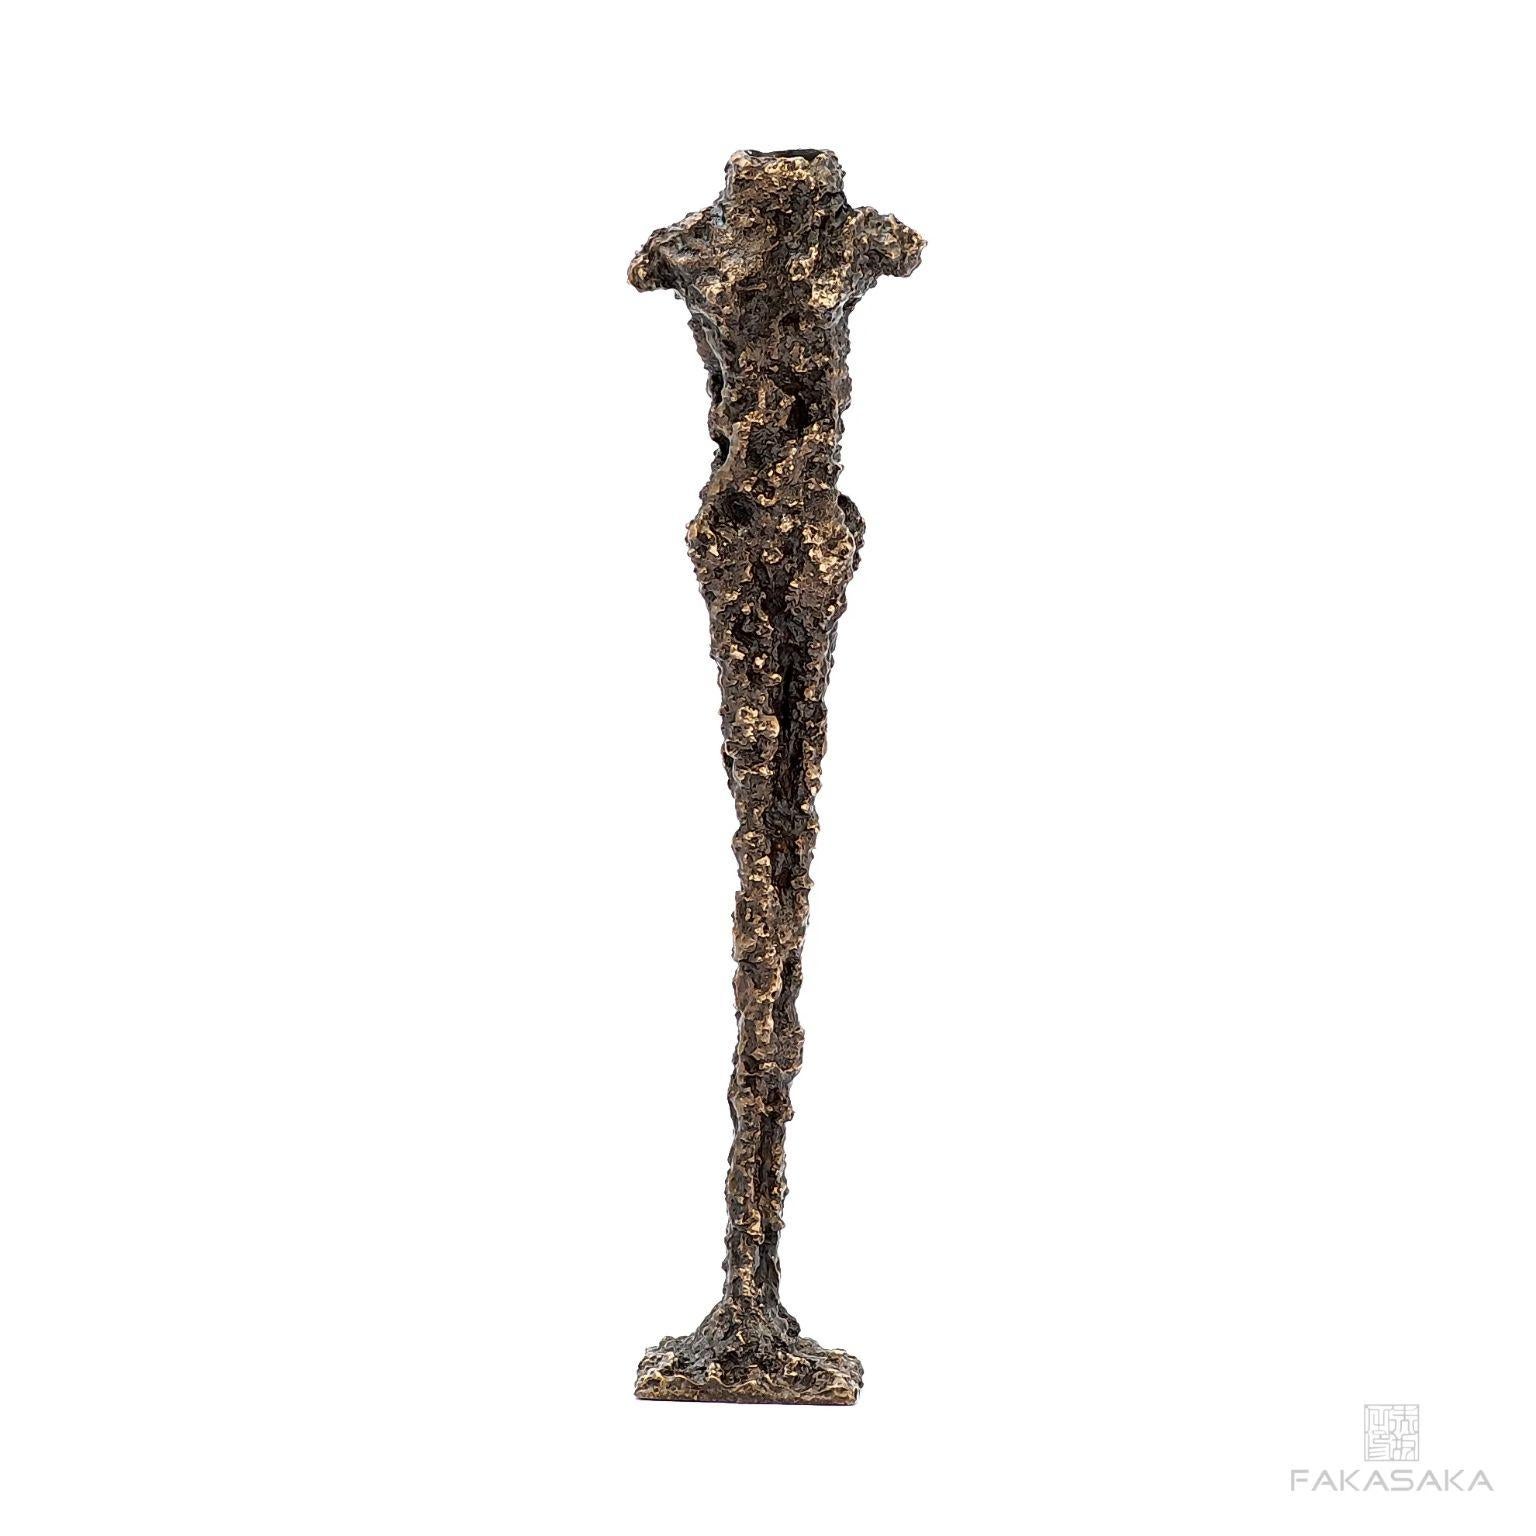 Hun Candleholder by Fakasaka Design
Dimensions: W 9 cm D 6 cm H 33 cm.
Materials: dark bronze.
Also available in polished bronze.

 FAKASAKA is a design company focused on production of high-end furniture, lighting, decorative objects, jewels, and